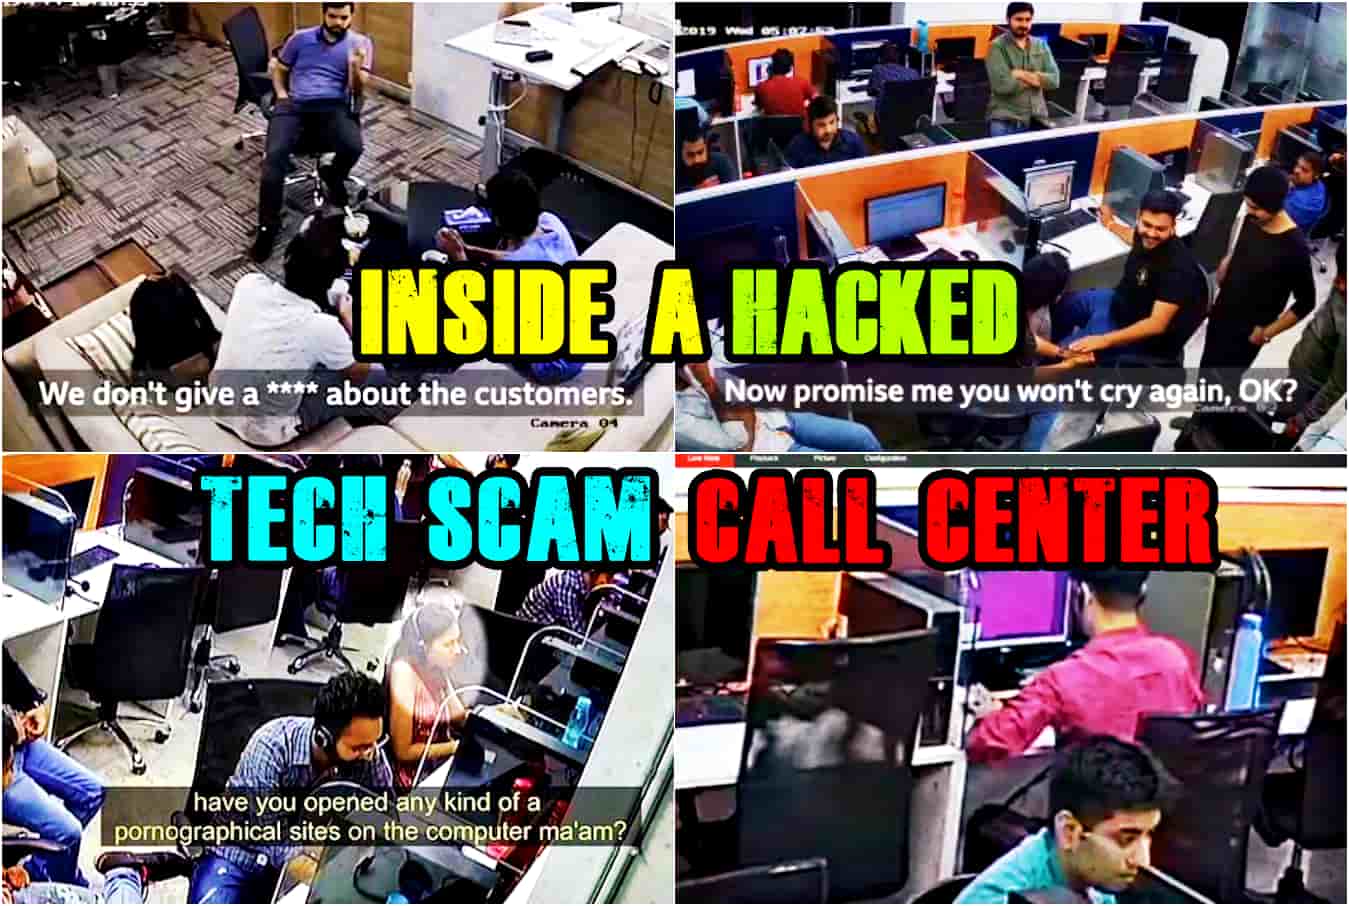 Man hacks Indian tech support scam call center; leaks CCTV footage